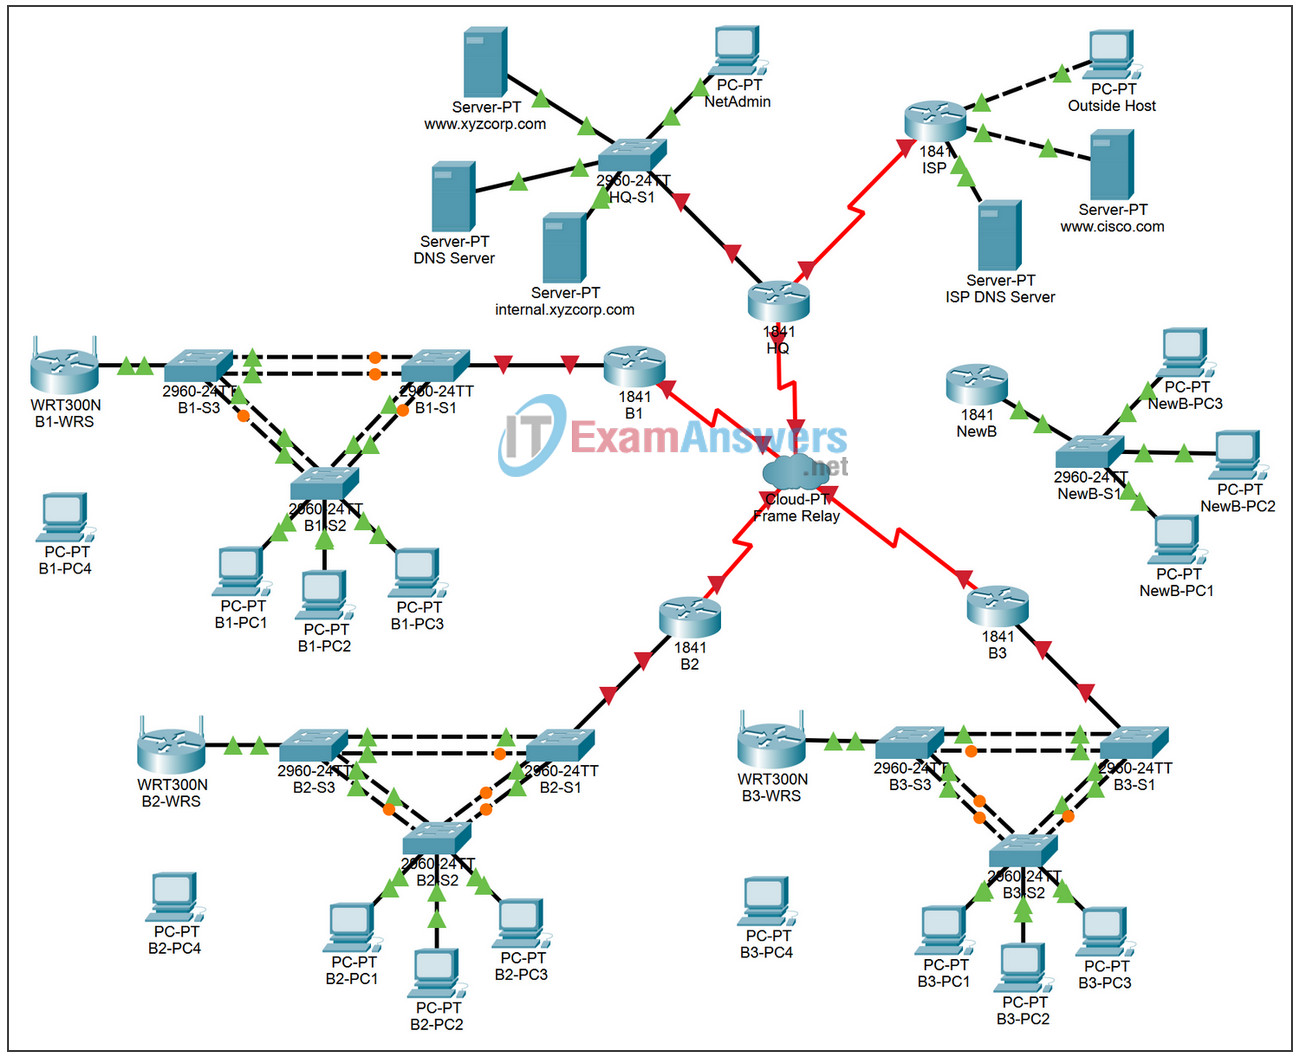 8.6.1 Packet Tracer - CCNA Skills Integration Challenge Answers 2